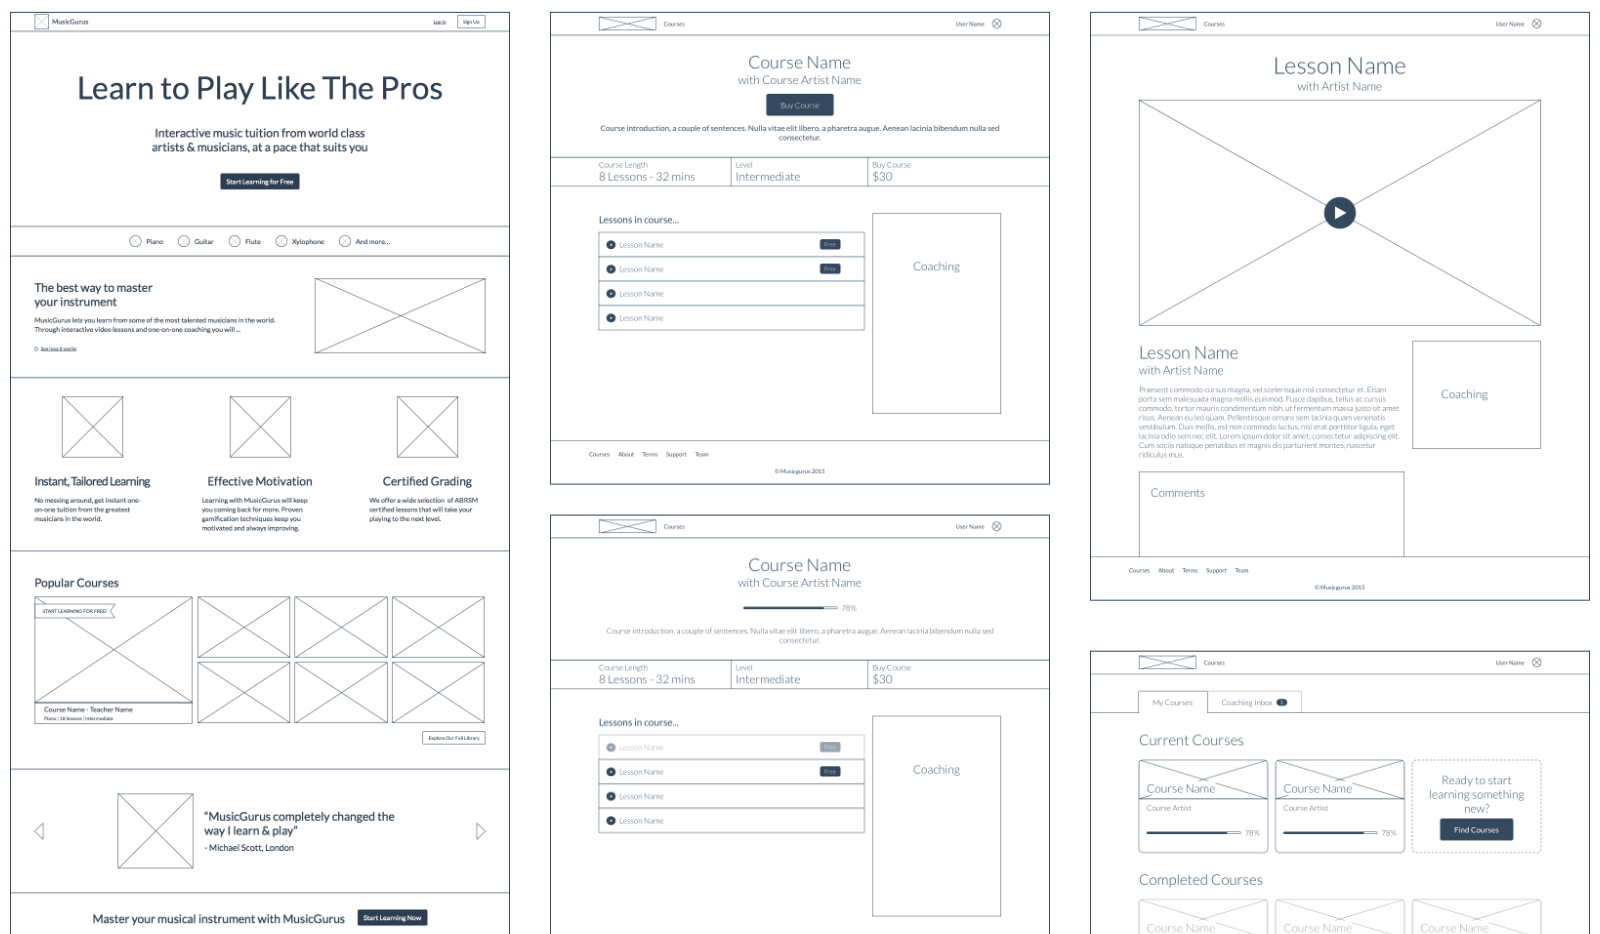 Screenshots of wireframes from the product design process